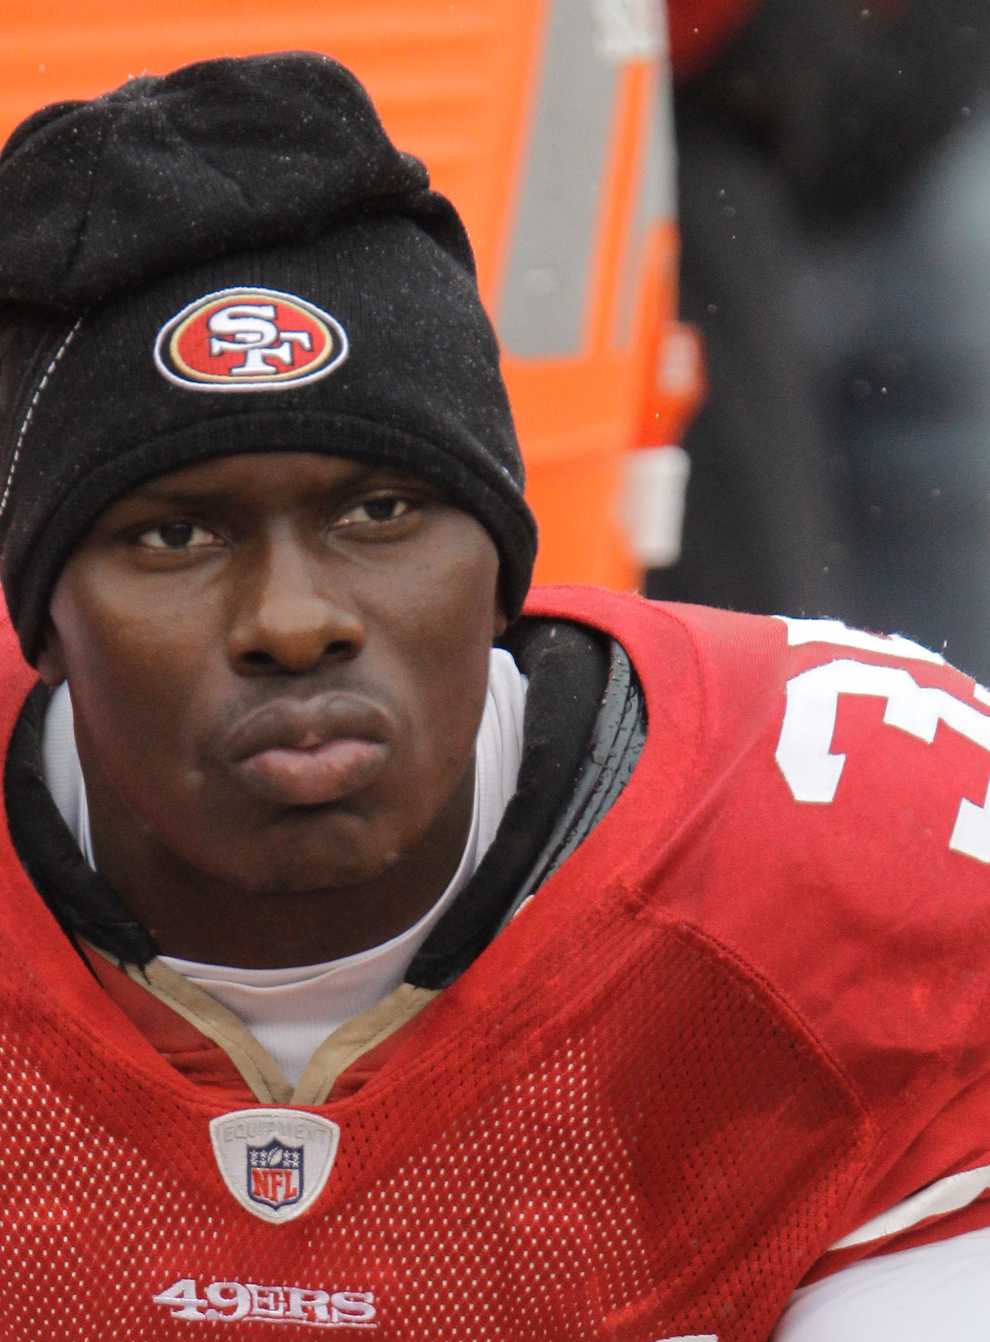 Phillip Adams sits on the bench in his San Francisco 49ers' uniform